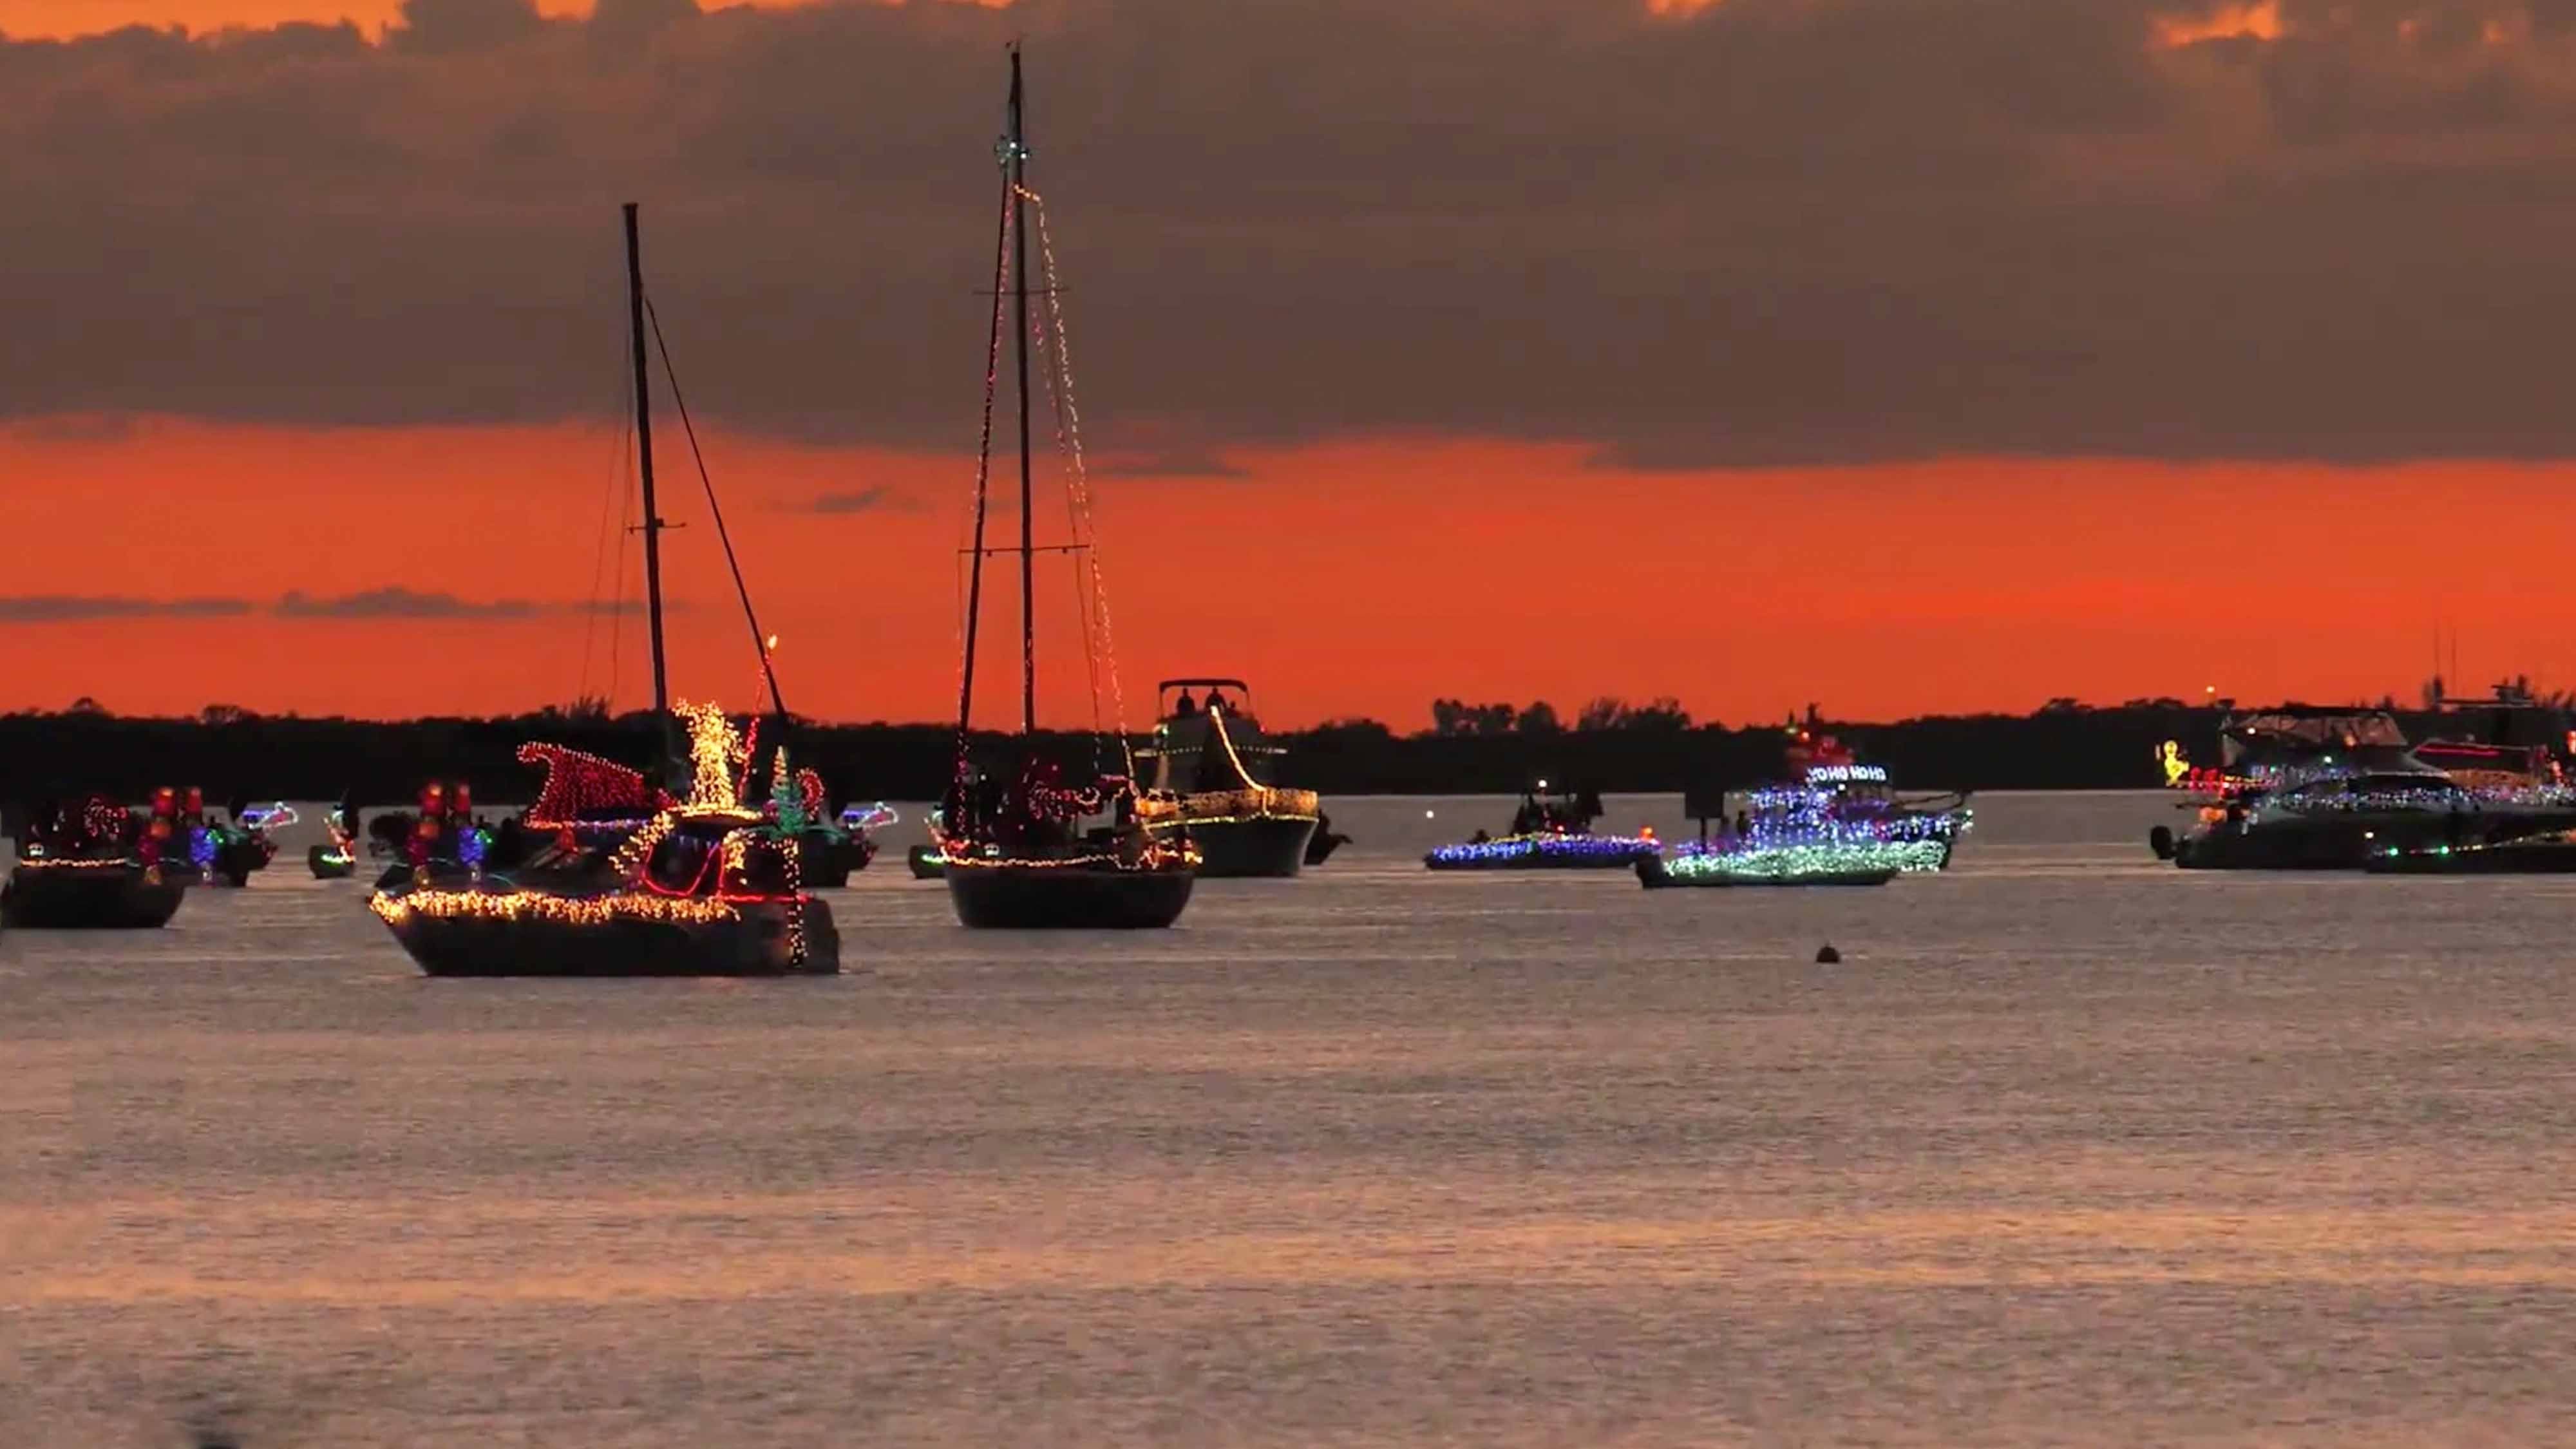 The annual Apollo Beach Lighted Boat Parade continued in Florida, US